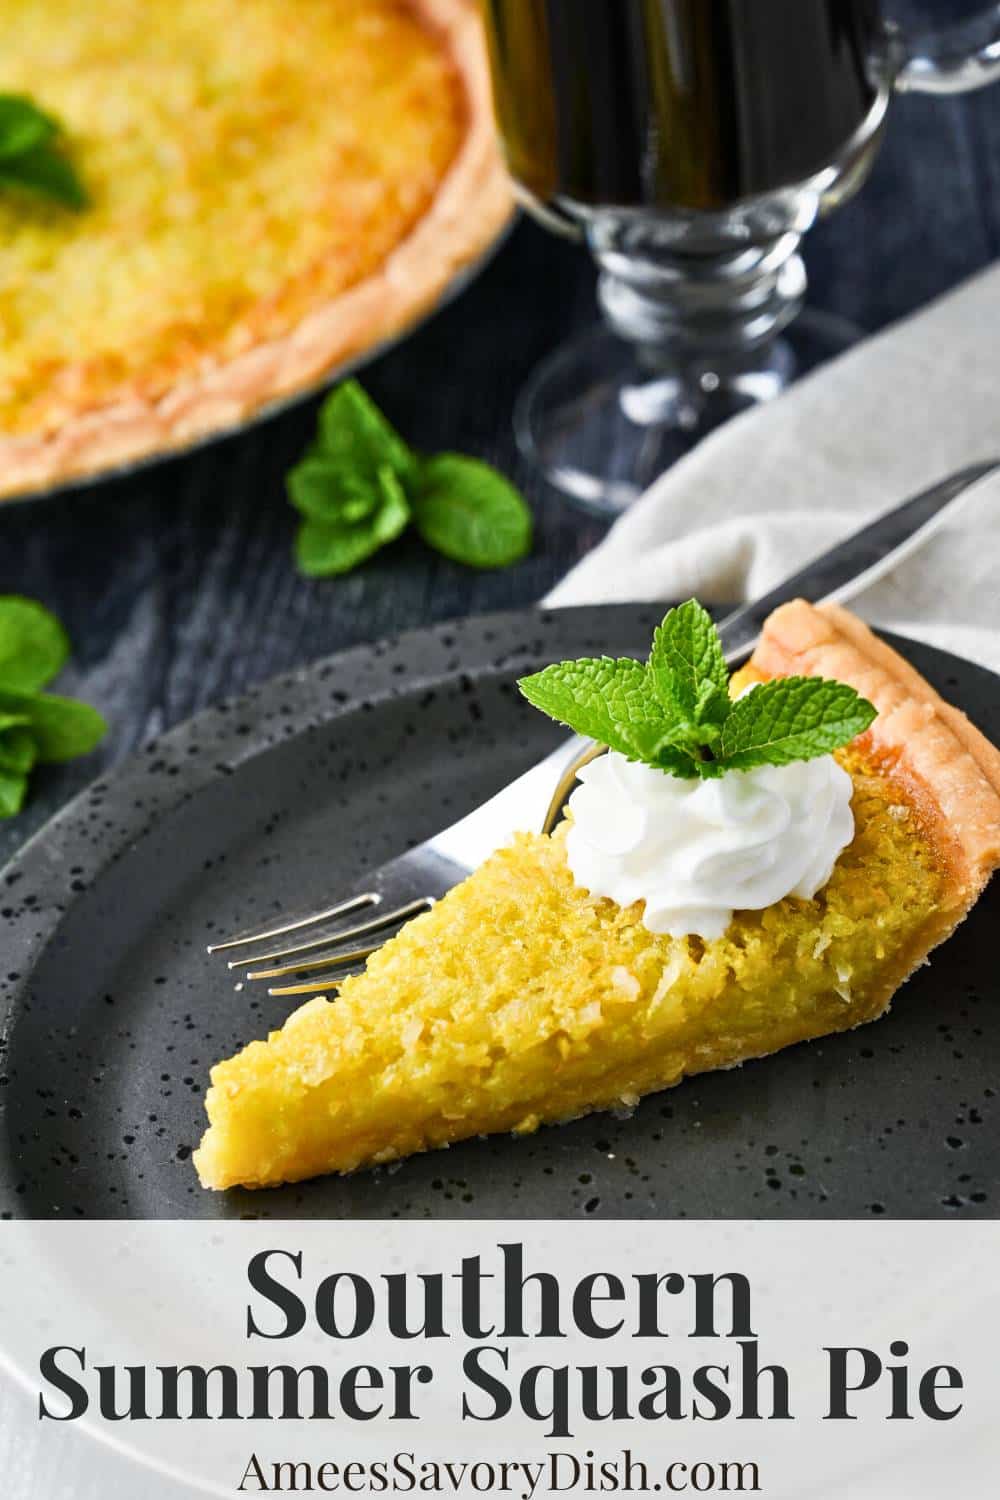 Summer squash pie a custard-based pie made with yellow squash, coconut, eggs, butter, vanilla, and flour.  This southern summer pie recipe is sweet, creamy, and full of flavor.  via @Ameessavorydish